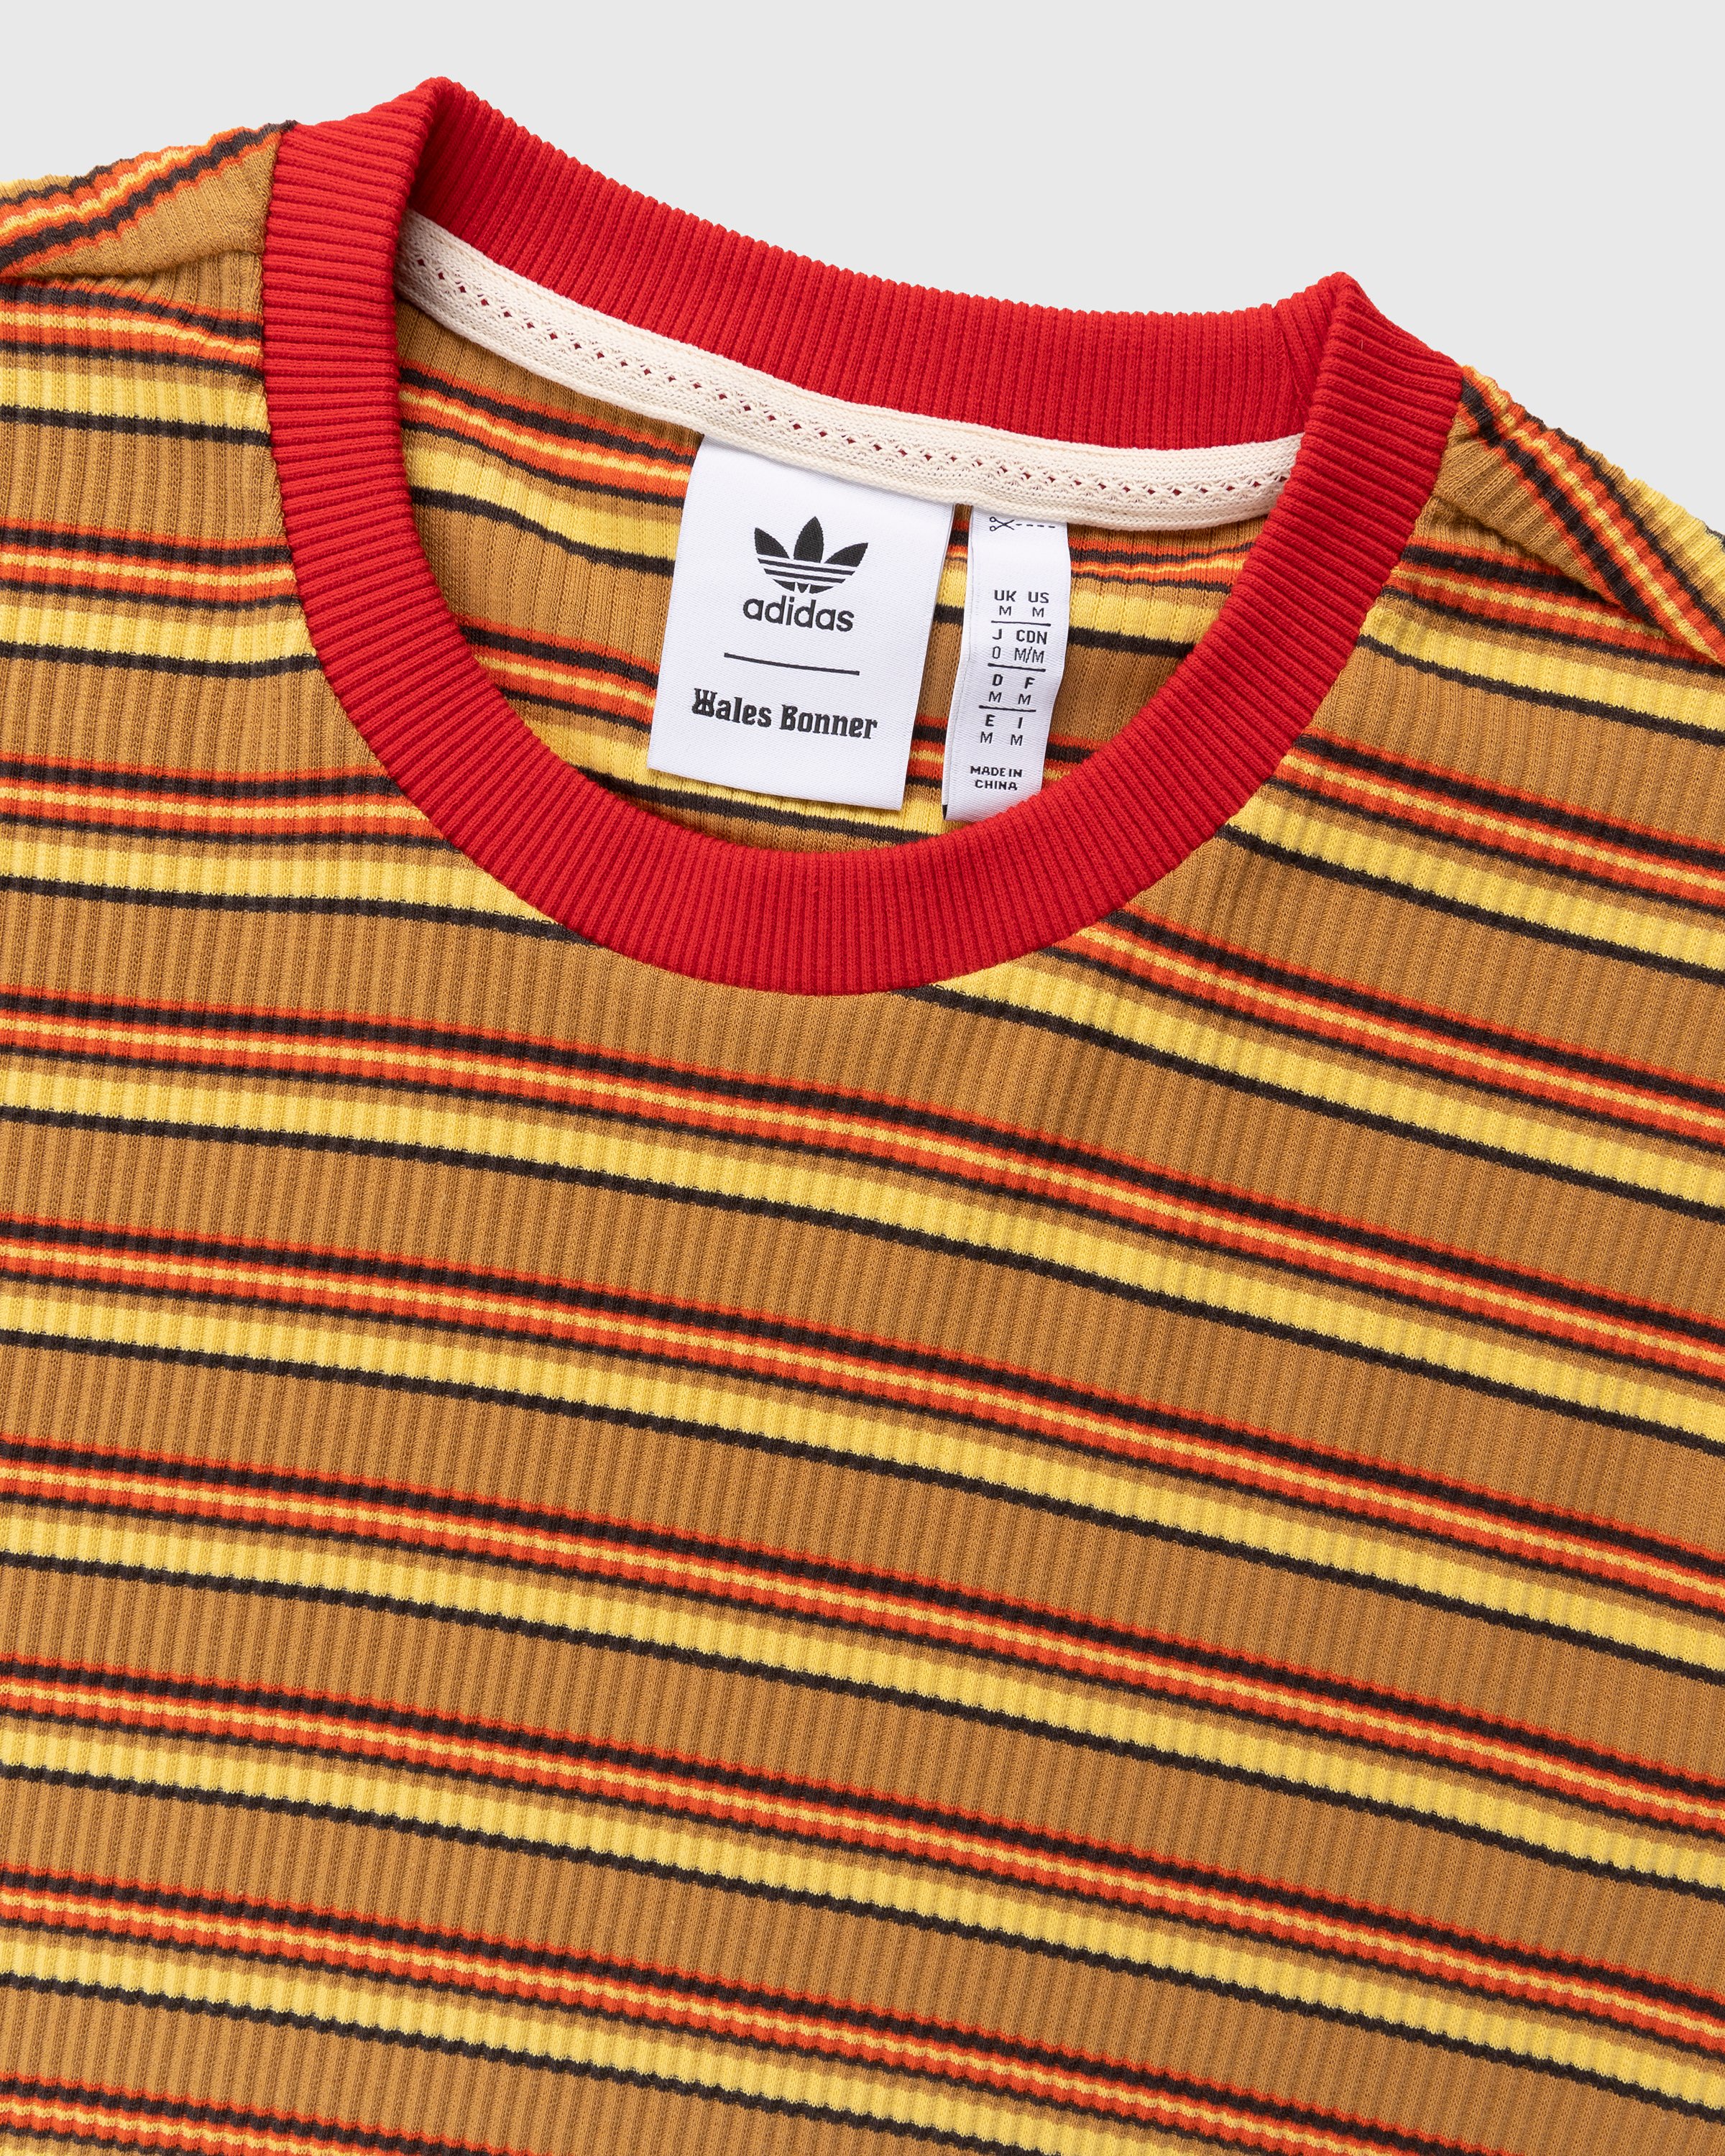 Adidas x Wales Bonner - WB Striped Longsleeve St Fade Gold/Scarlet - Clothing - Red - Image 5